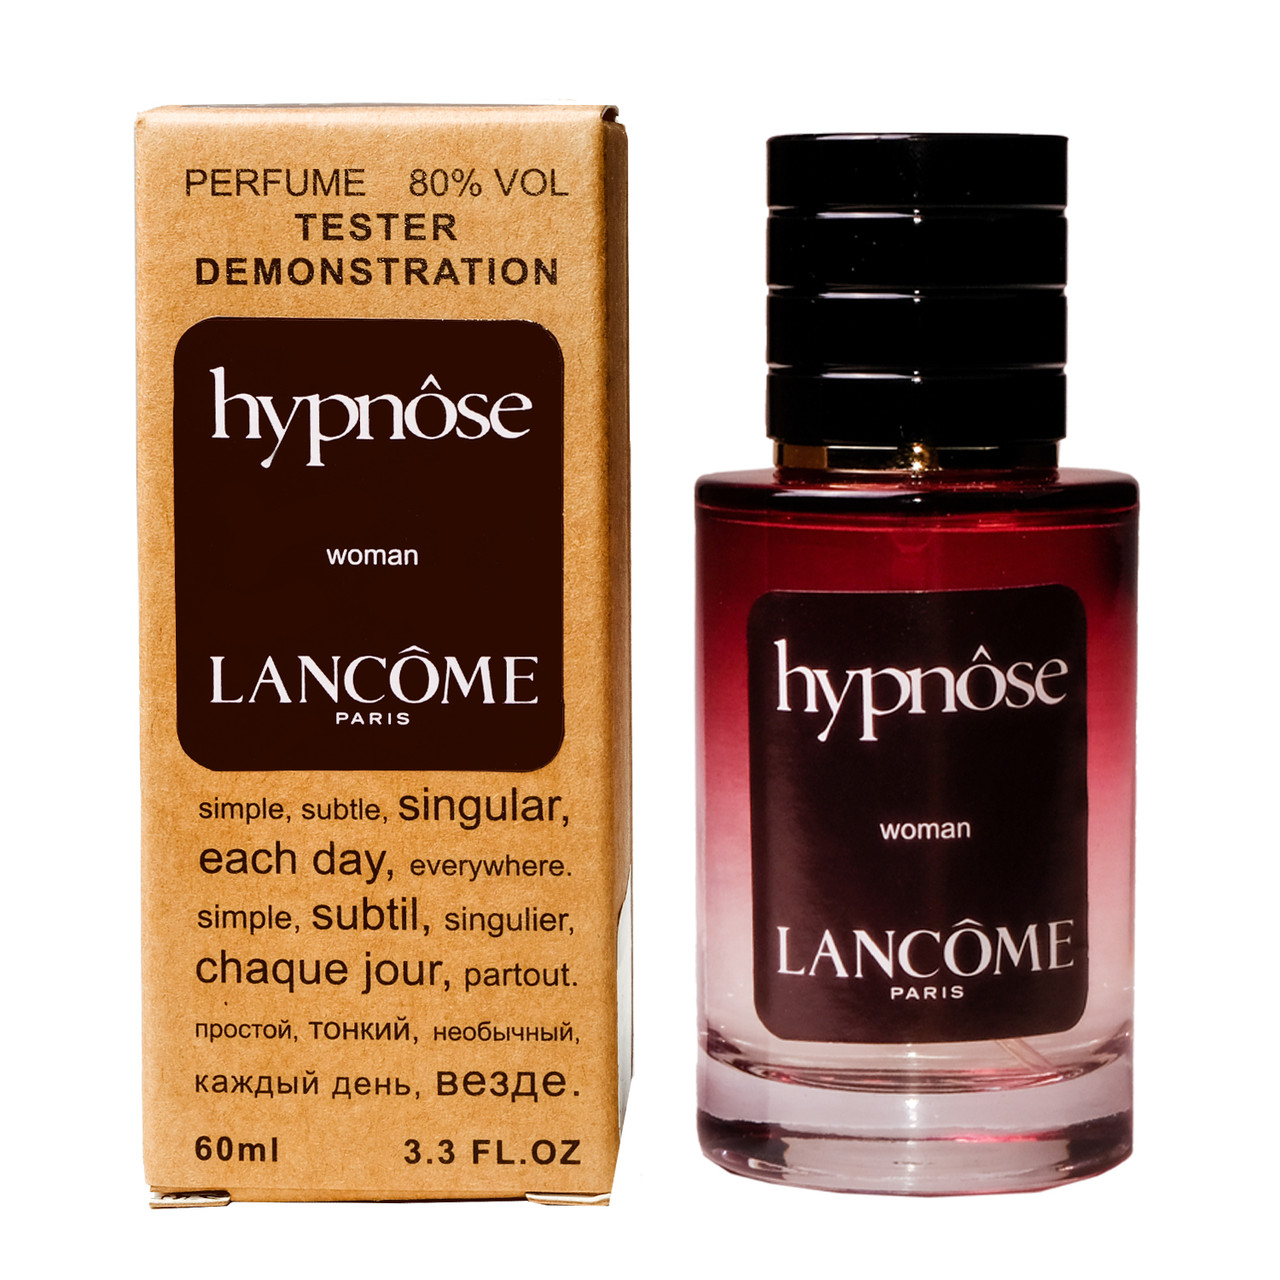 Lancome Hypnose TESTER LUX, 60 мл